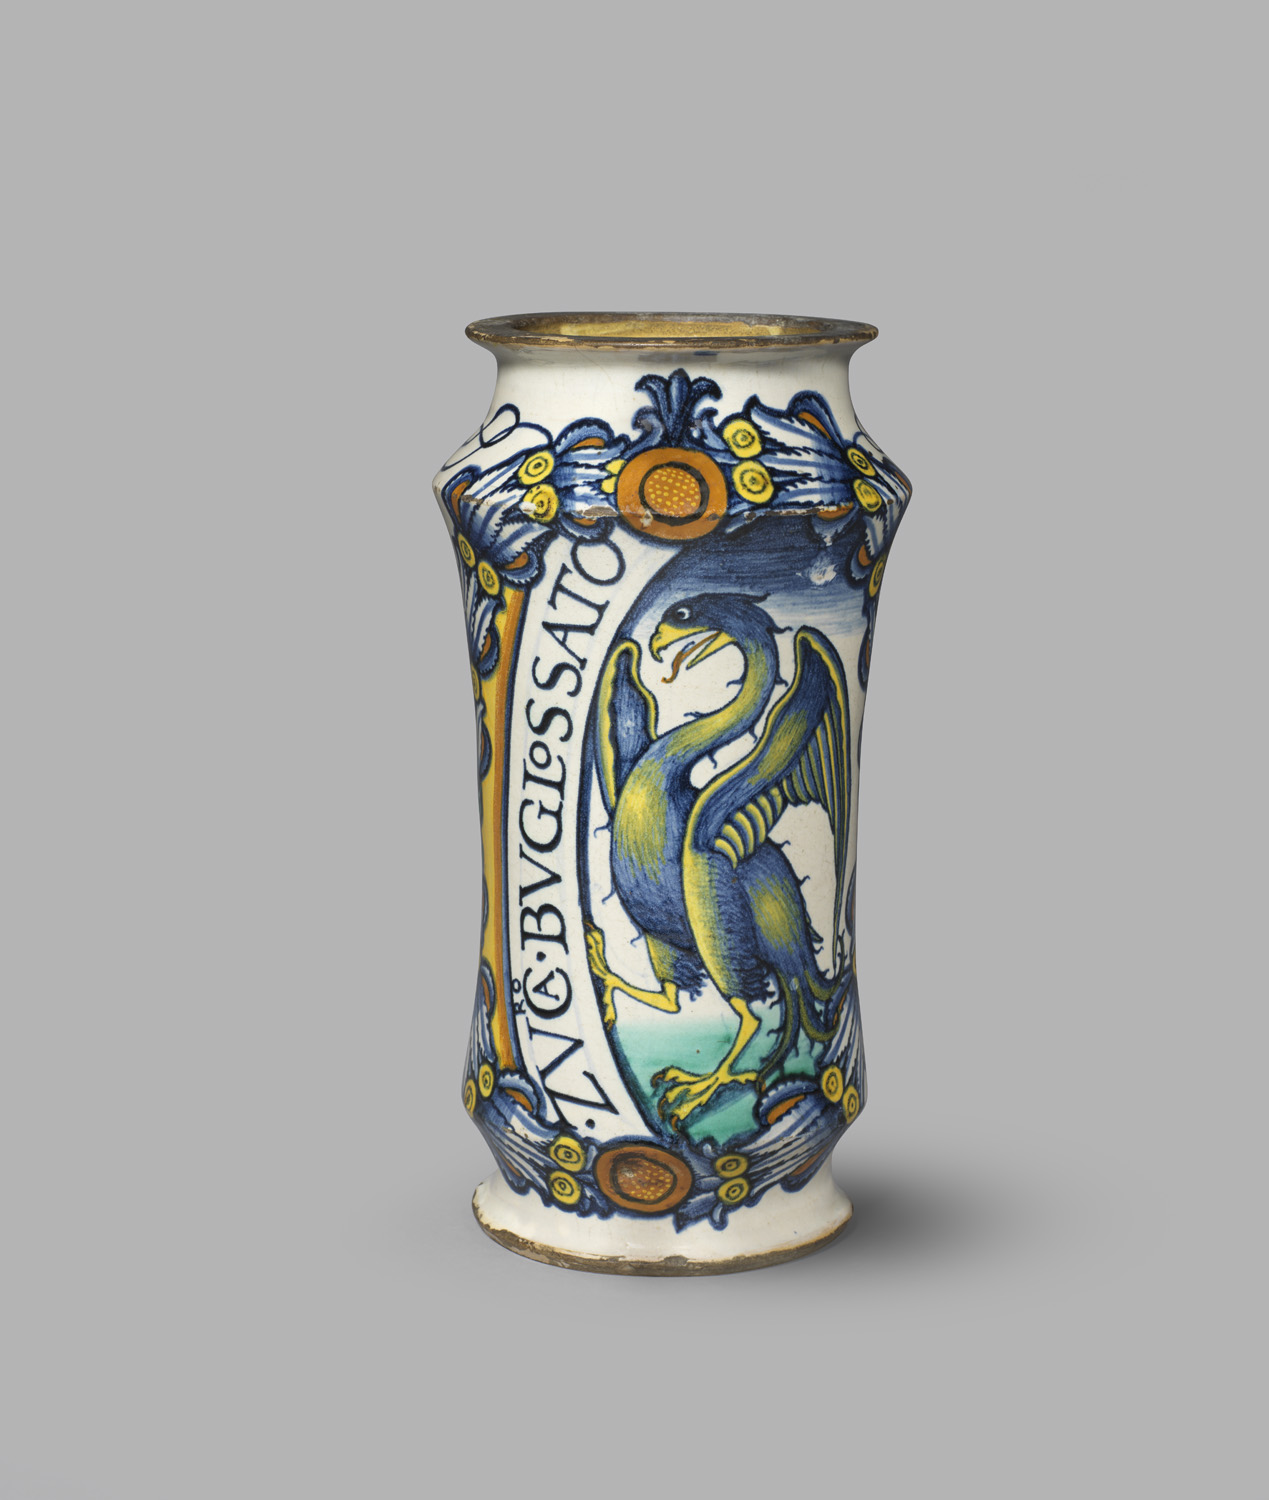 A pharmacy jar preserving bugloss, a type of herb. The jar has a blue and yellow colour scheme and has an eagle and an inscription painted on the front.